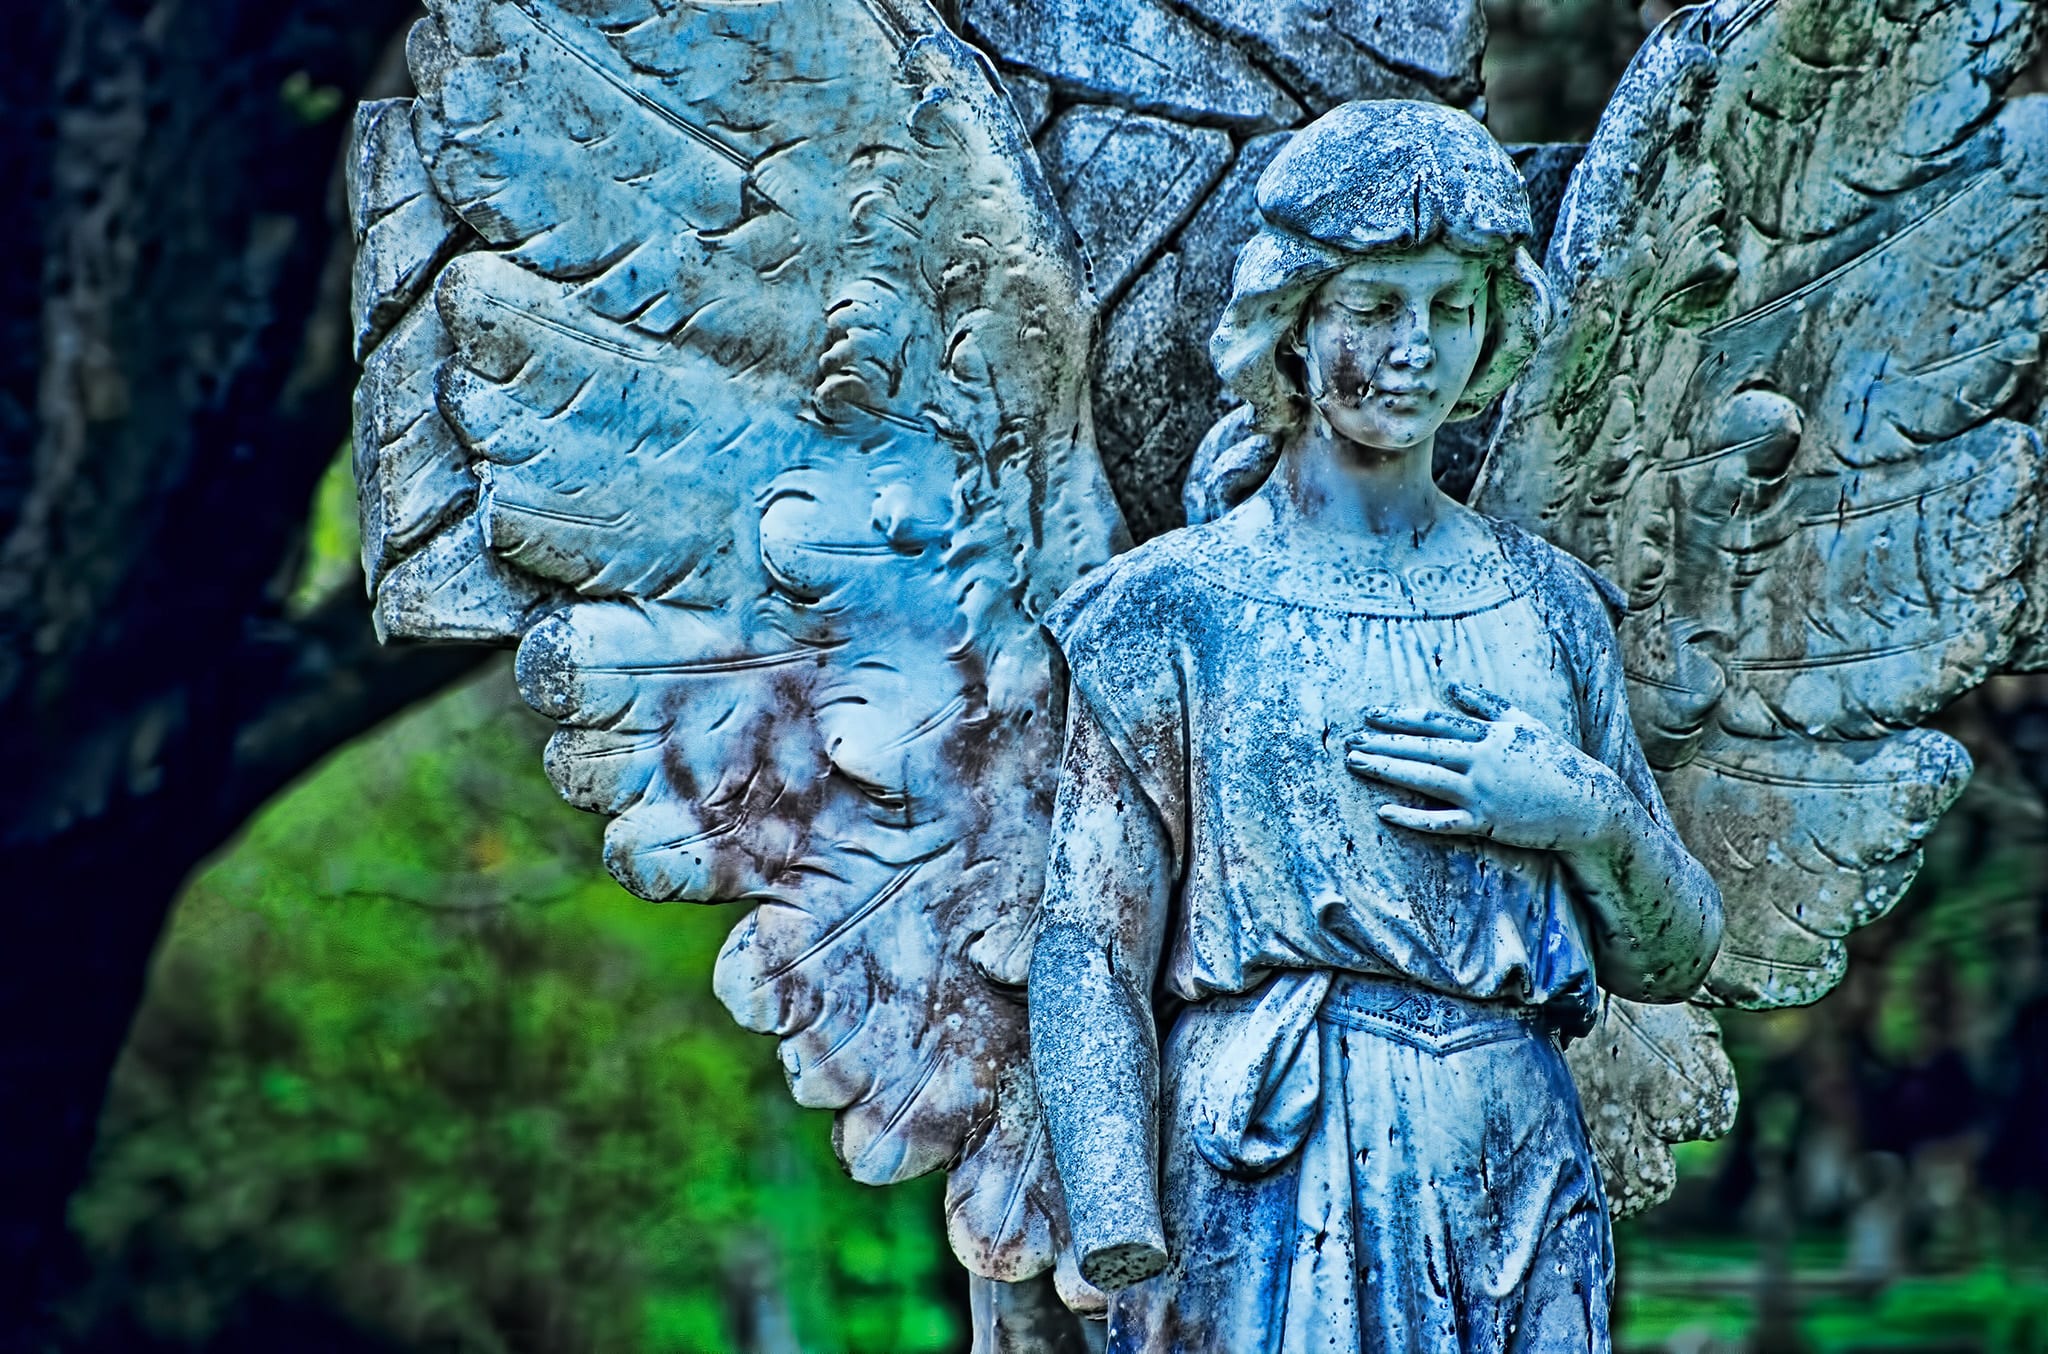 Angel Monument in the Ross Bay Cemetry, Victoria, British Columbia, Canada.